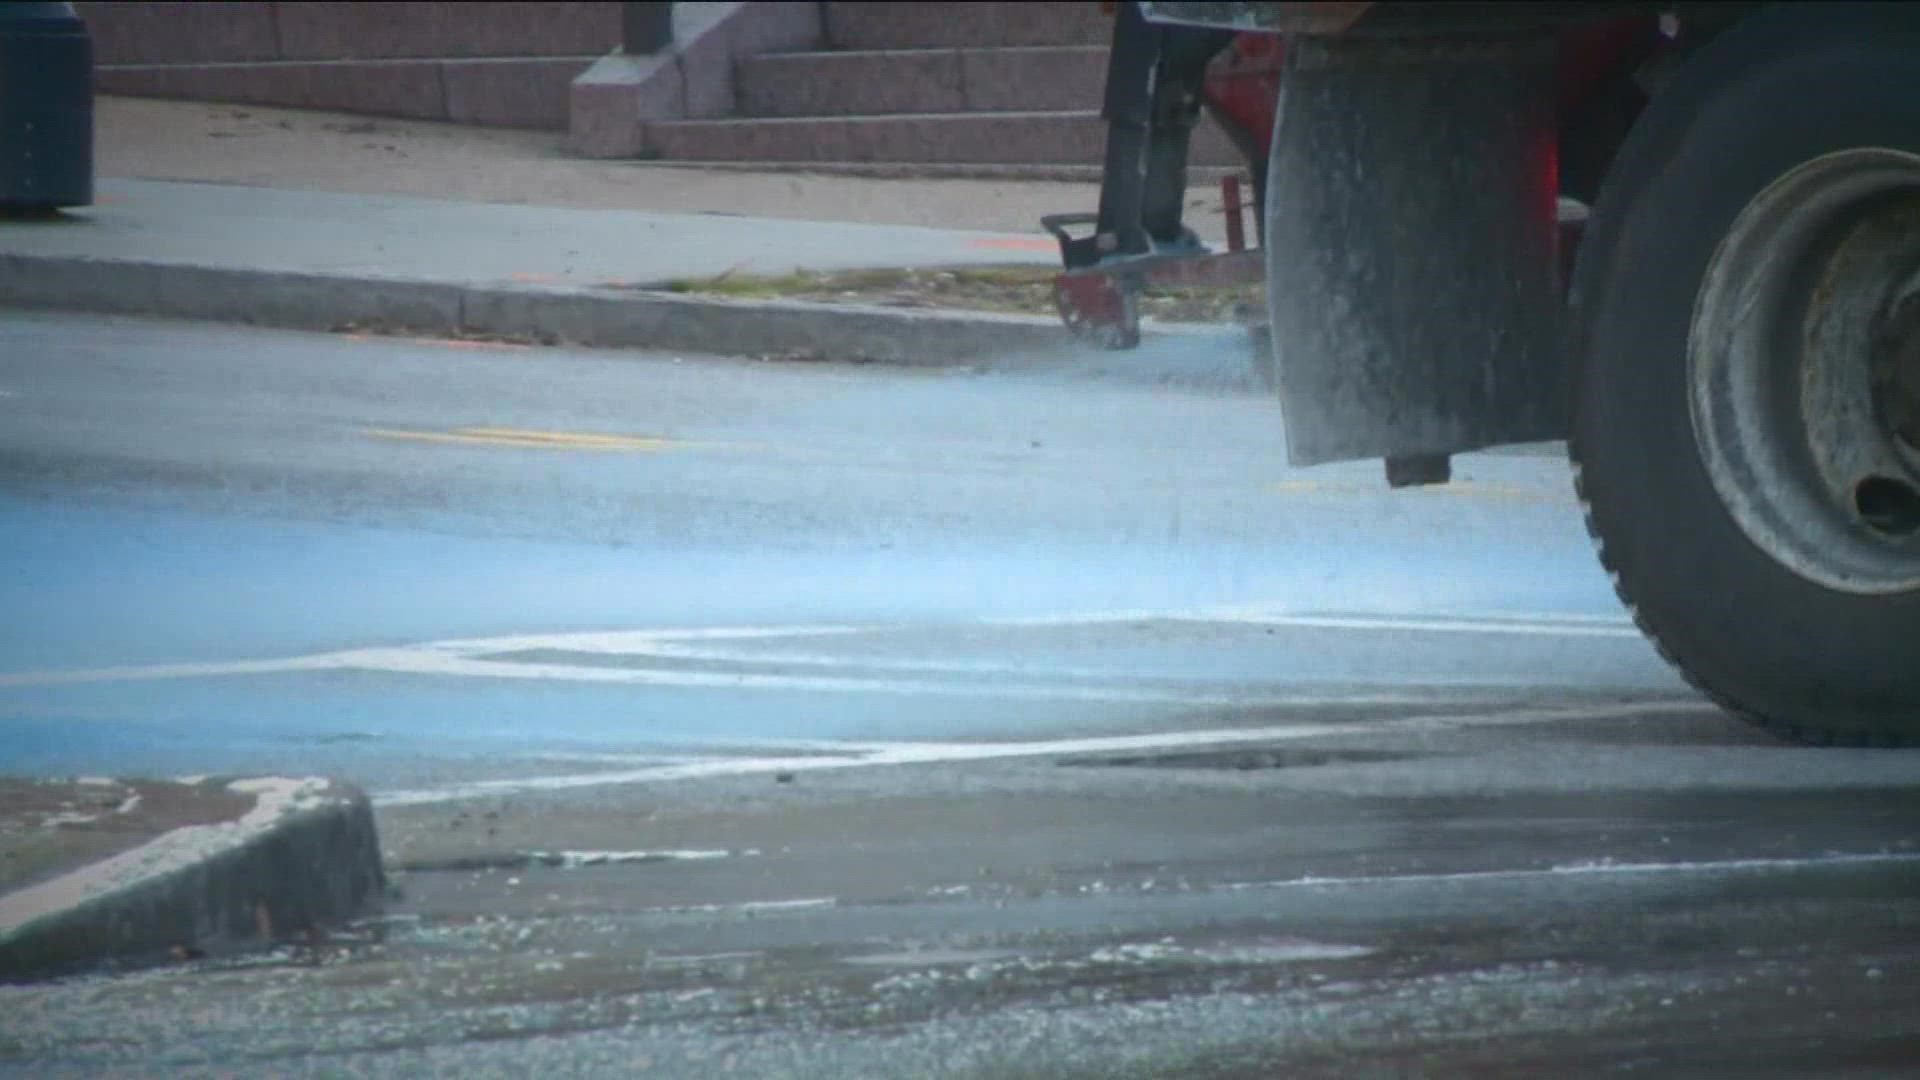 GDOT is one of the agencies that places blue salt on the roads when snow and ice are an issue.